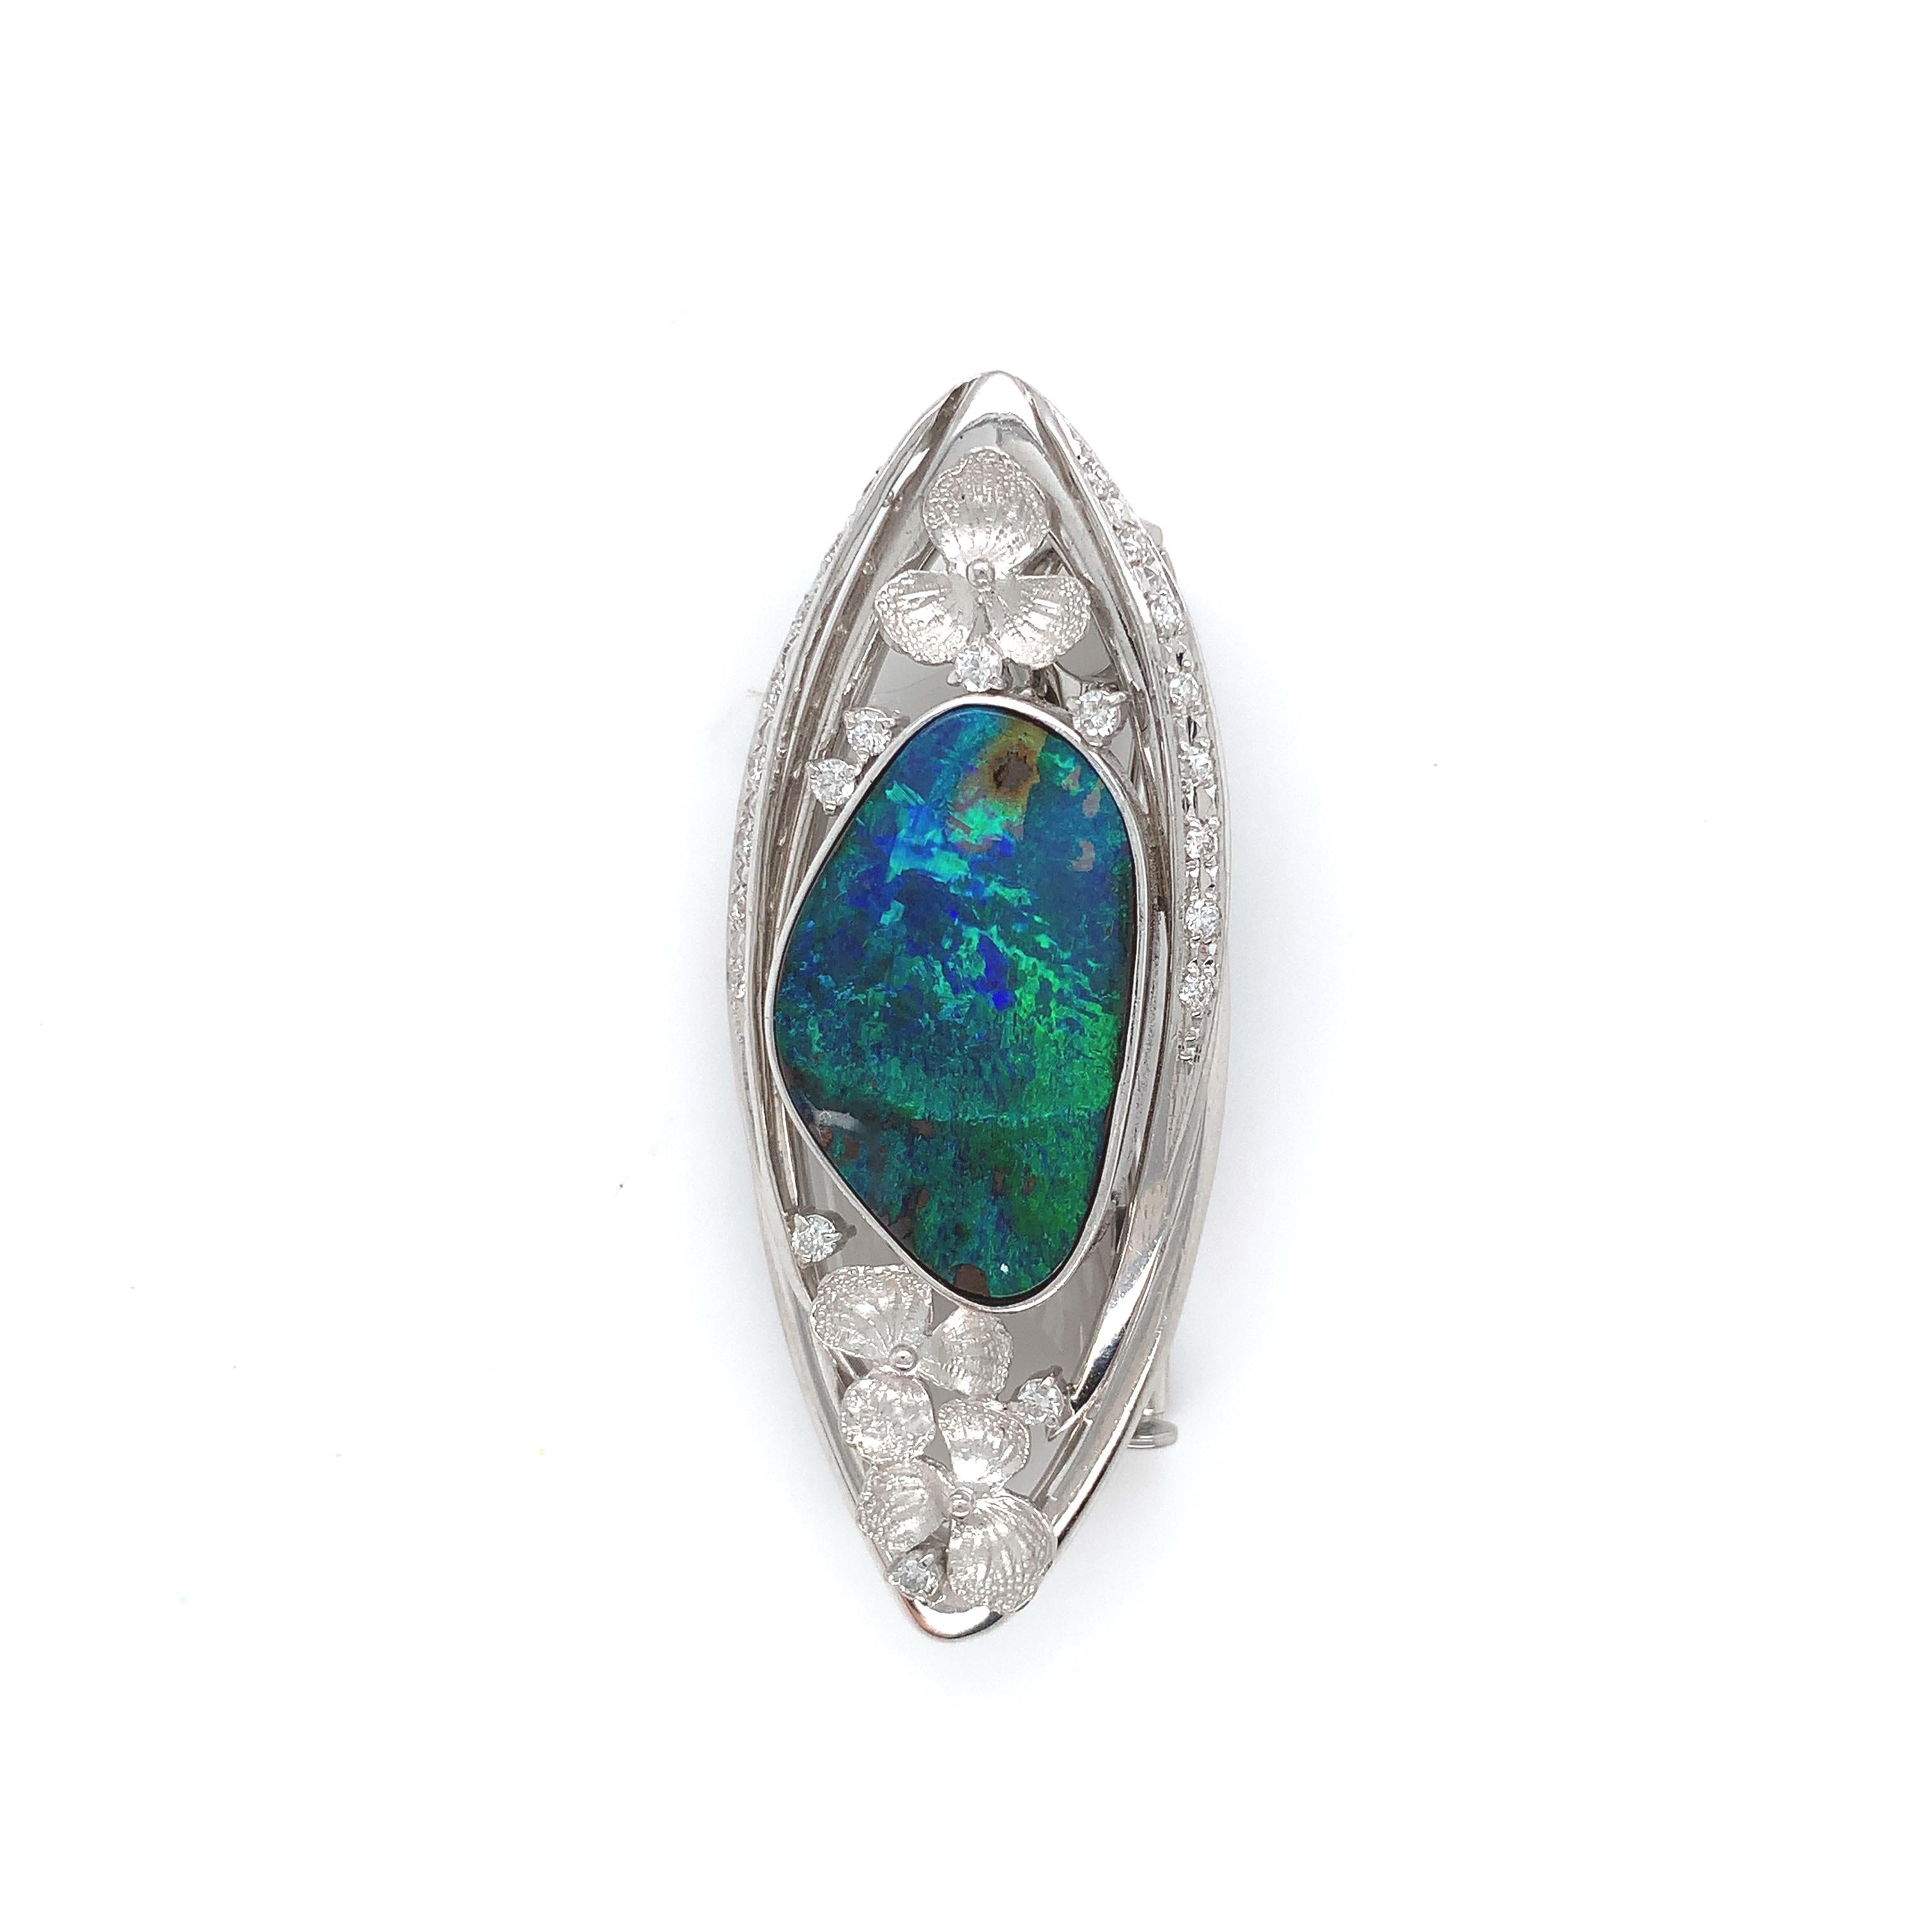 Incredible platinum pin/pendant featuring a large Australian black boulder opal. The opal has blue-green play of color with brown ironstone. The large opal measures about 22mm x 14mm with an oval freeform shape. The opal is set in a heavy custom